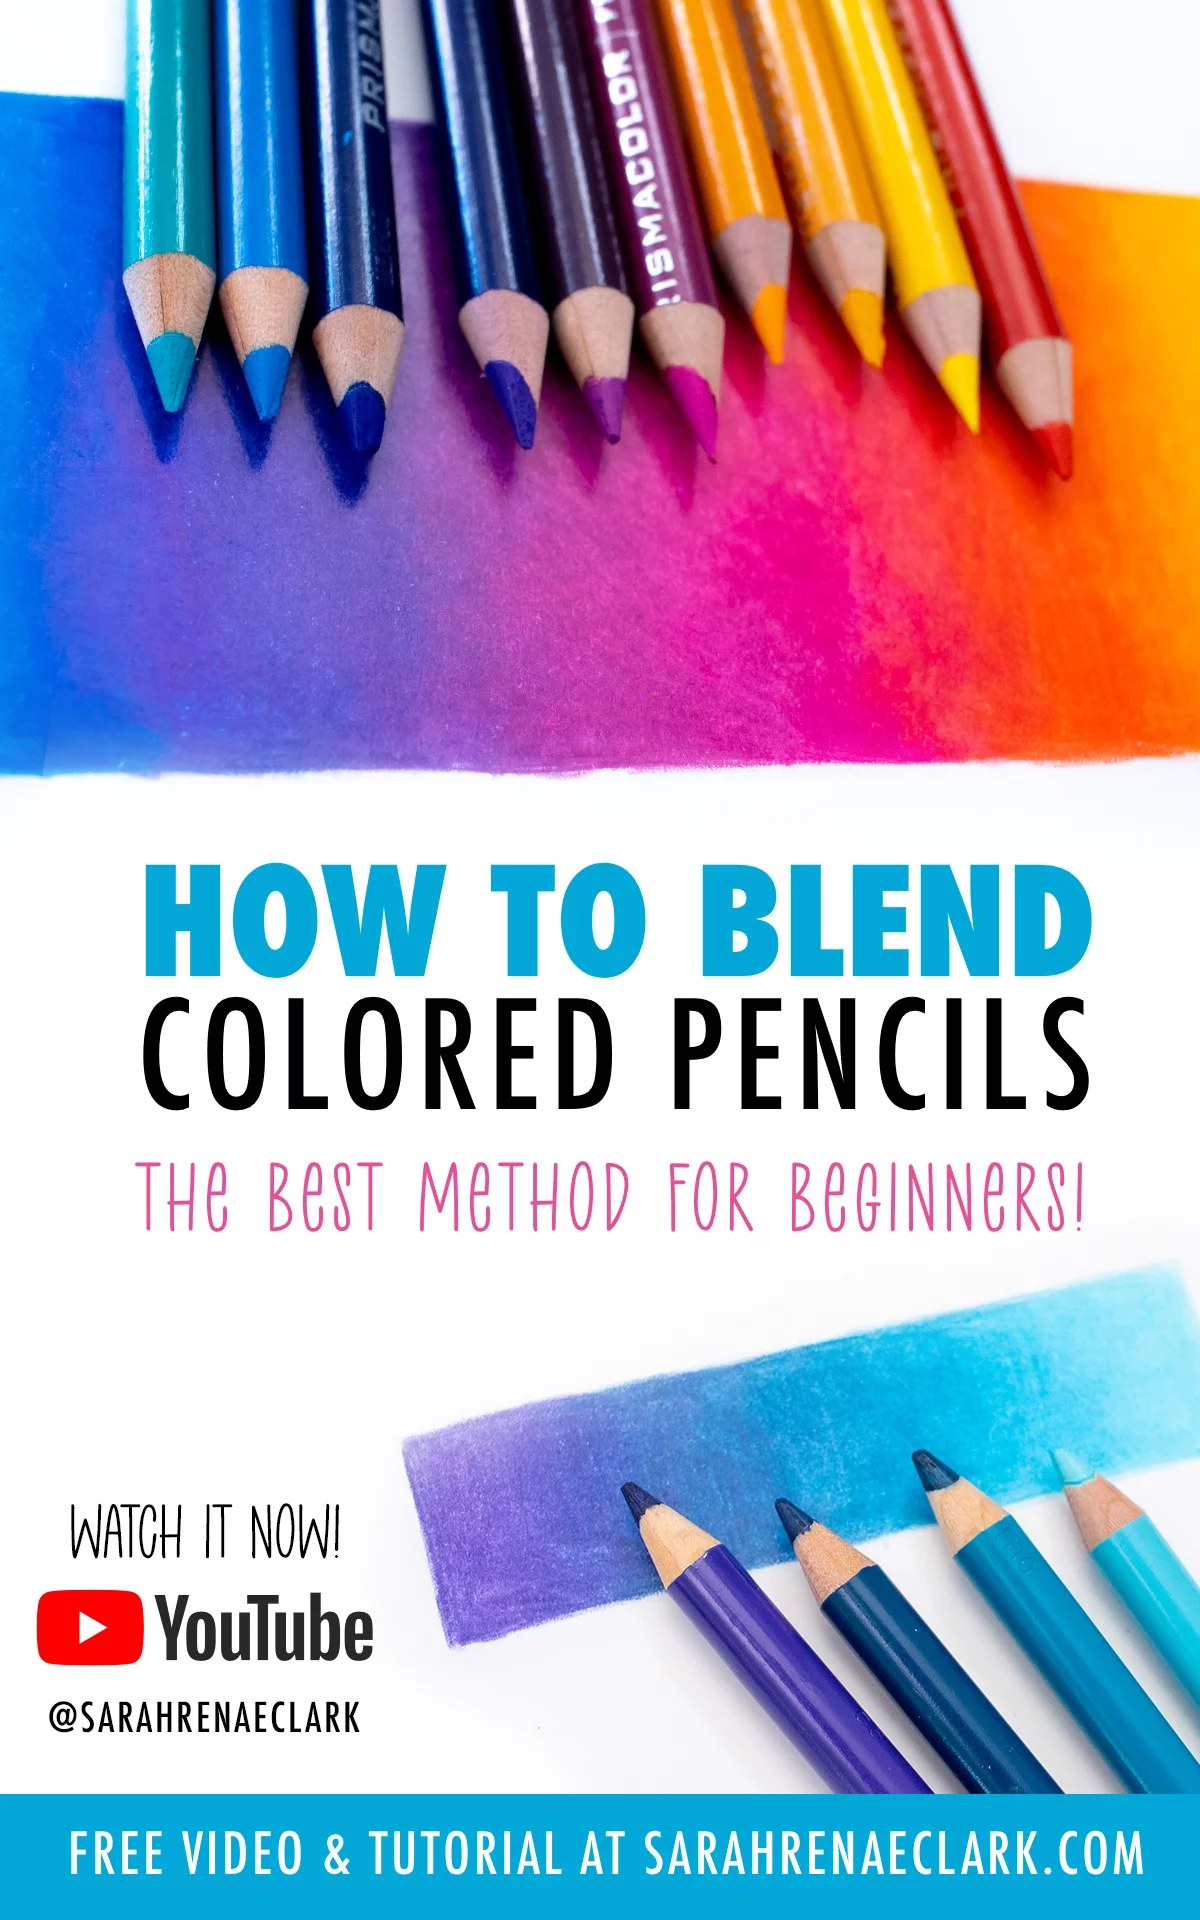 The BEST Colored Pencils: Pencil Recommendations and Buying Guide - Sarah  Renae Clark - Coloring Book Artist and Designer